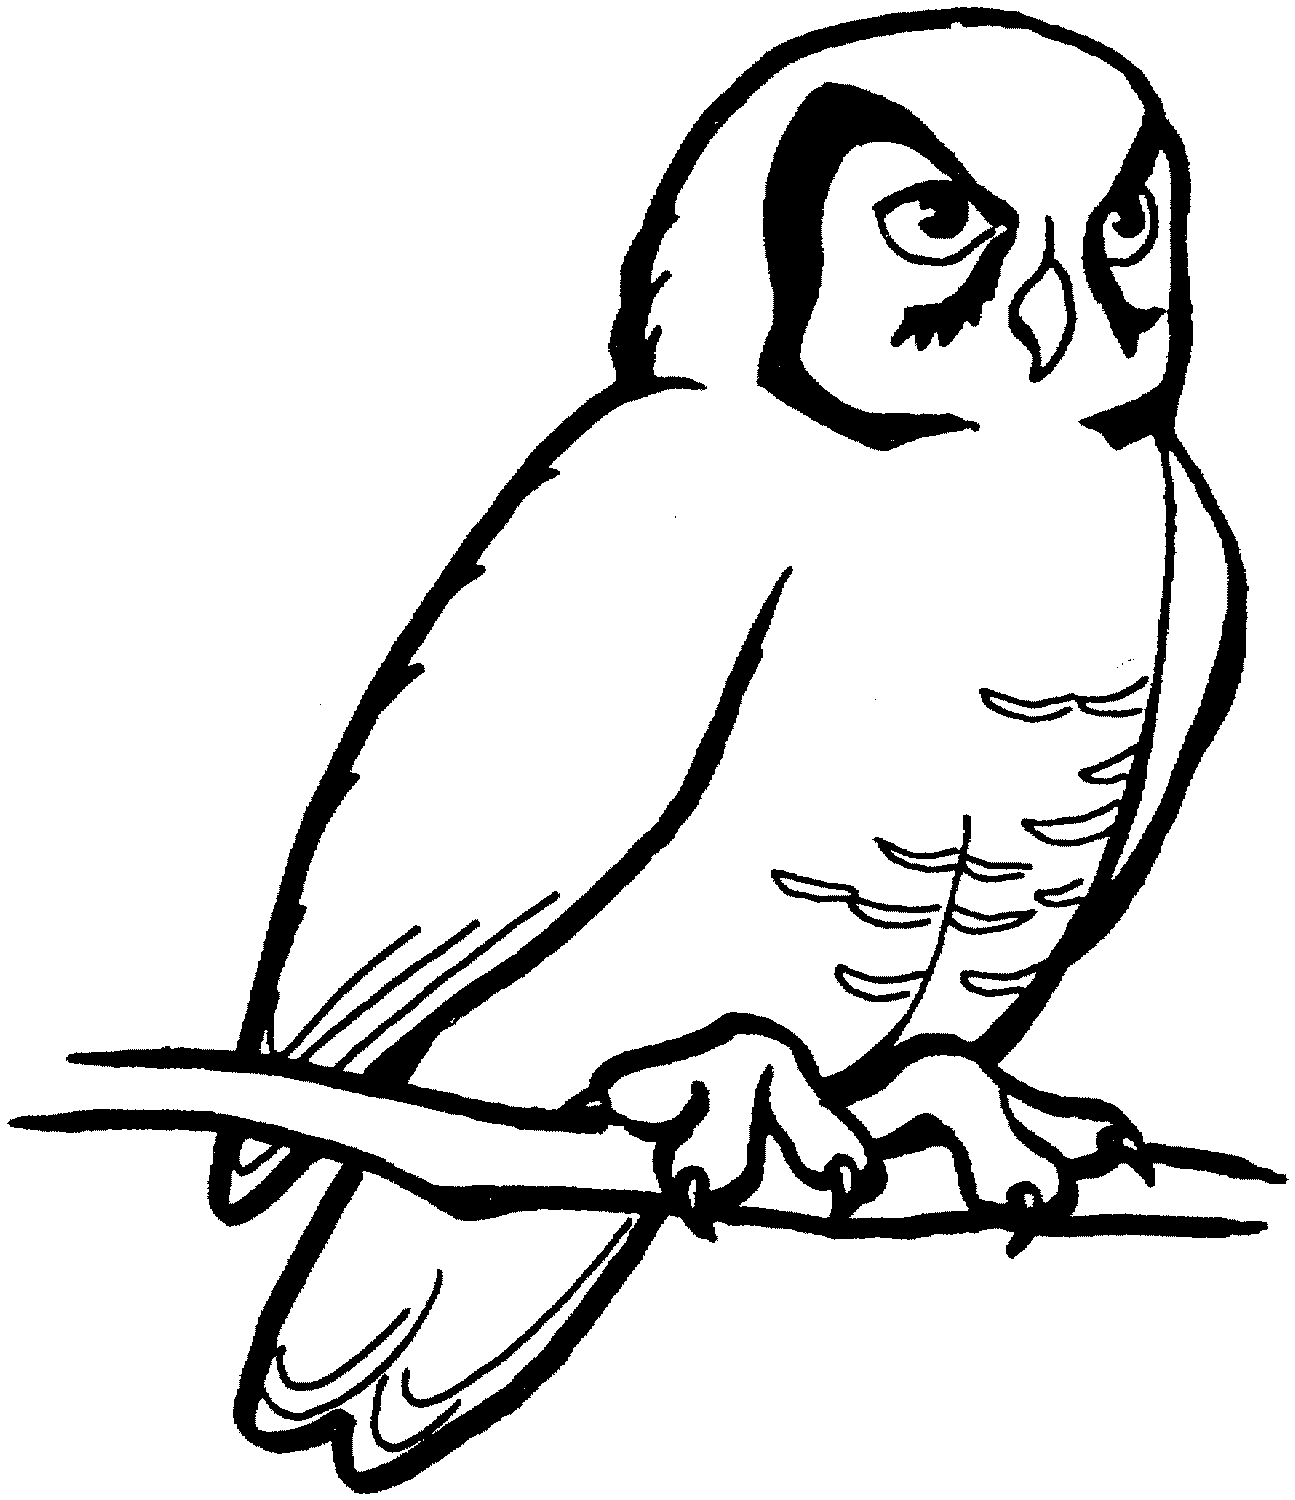 owl images clipart black and white - photo #22